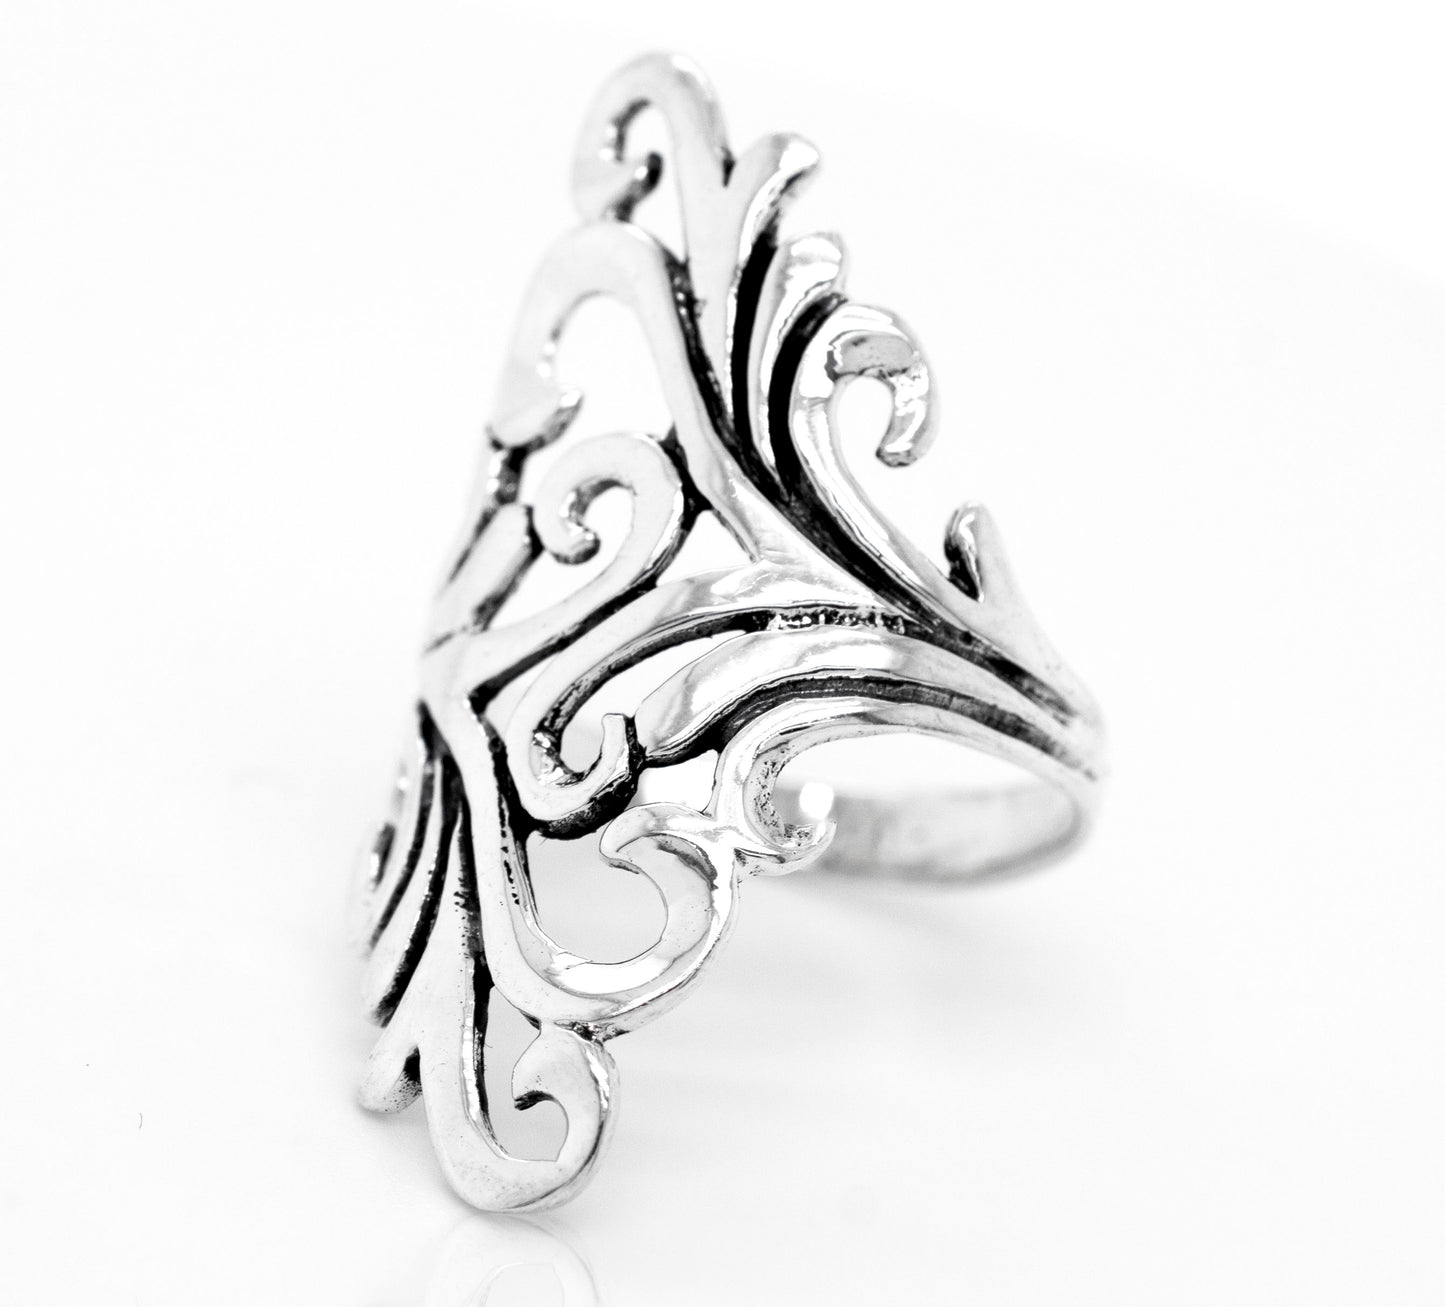 A Freeform Swirl Wrap Ring in an art nouveau style, beautifully crafted by Super Silver.